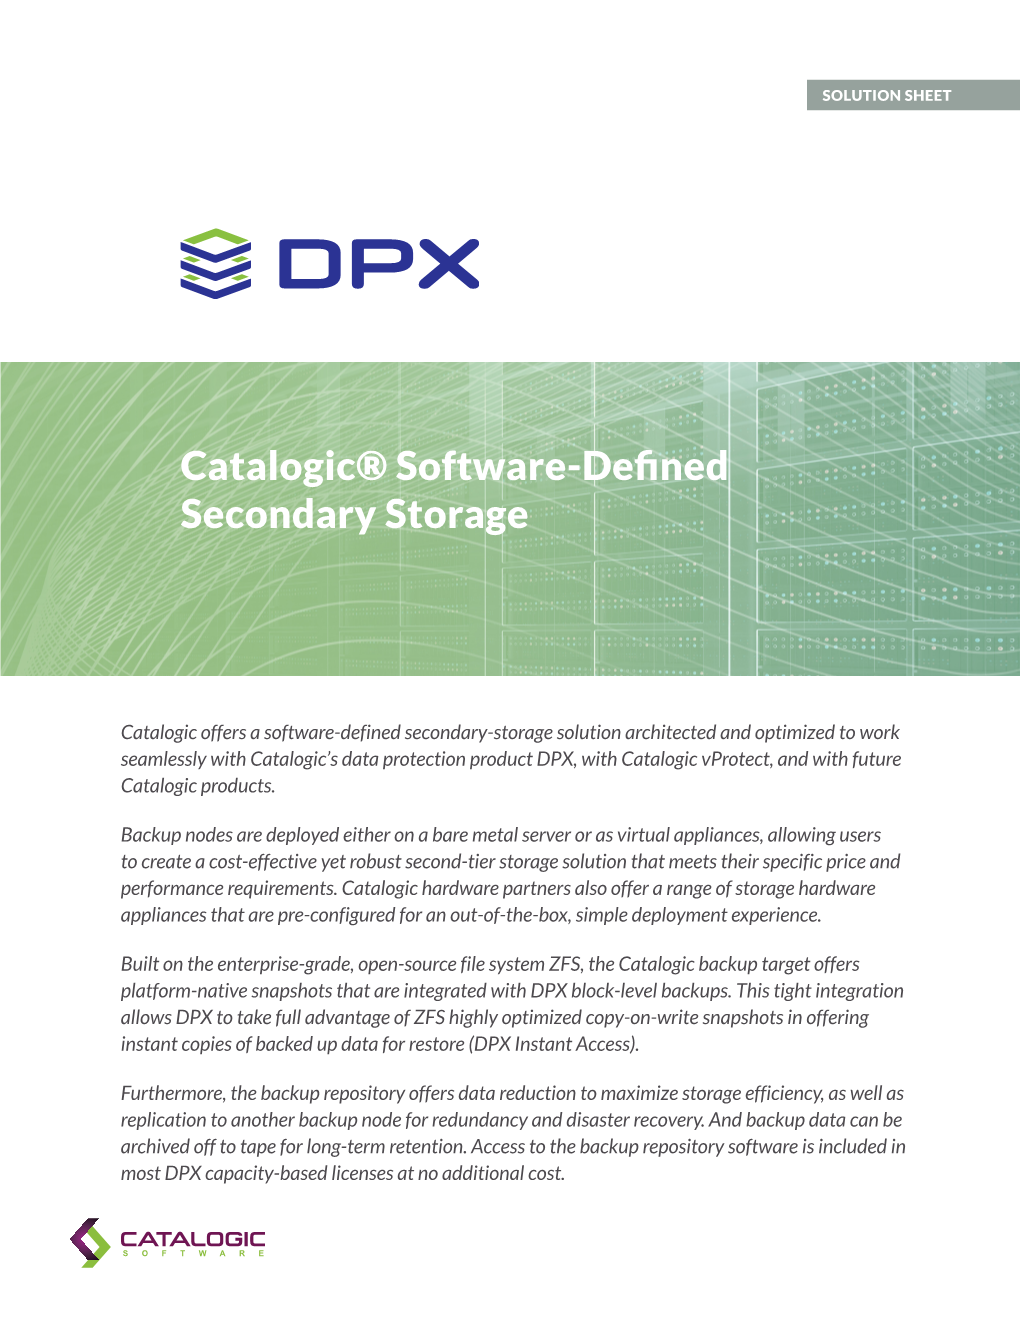 Catalogic® Software-Defined Secondary Storage